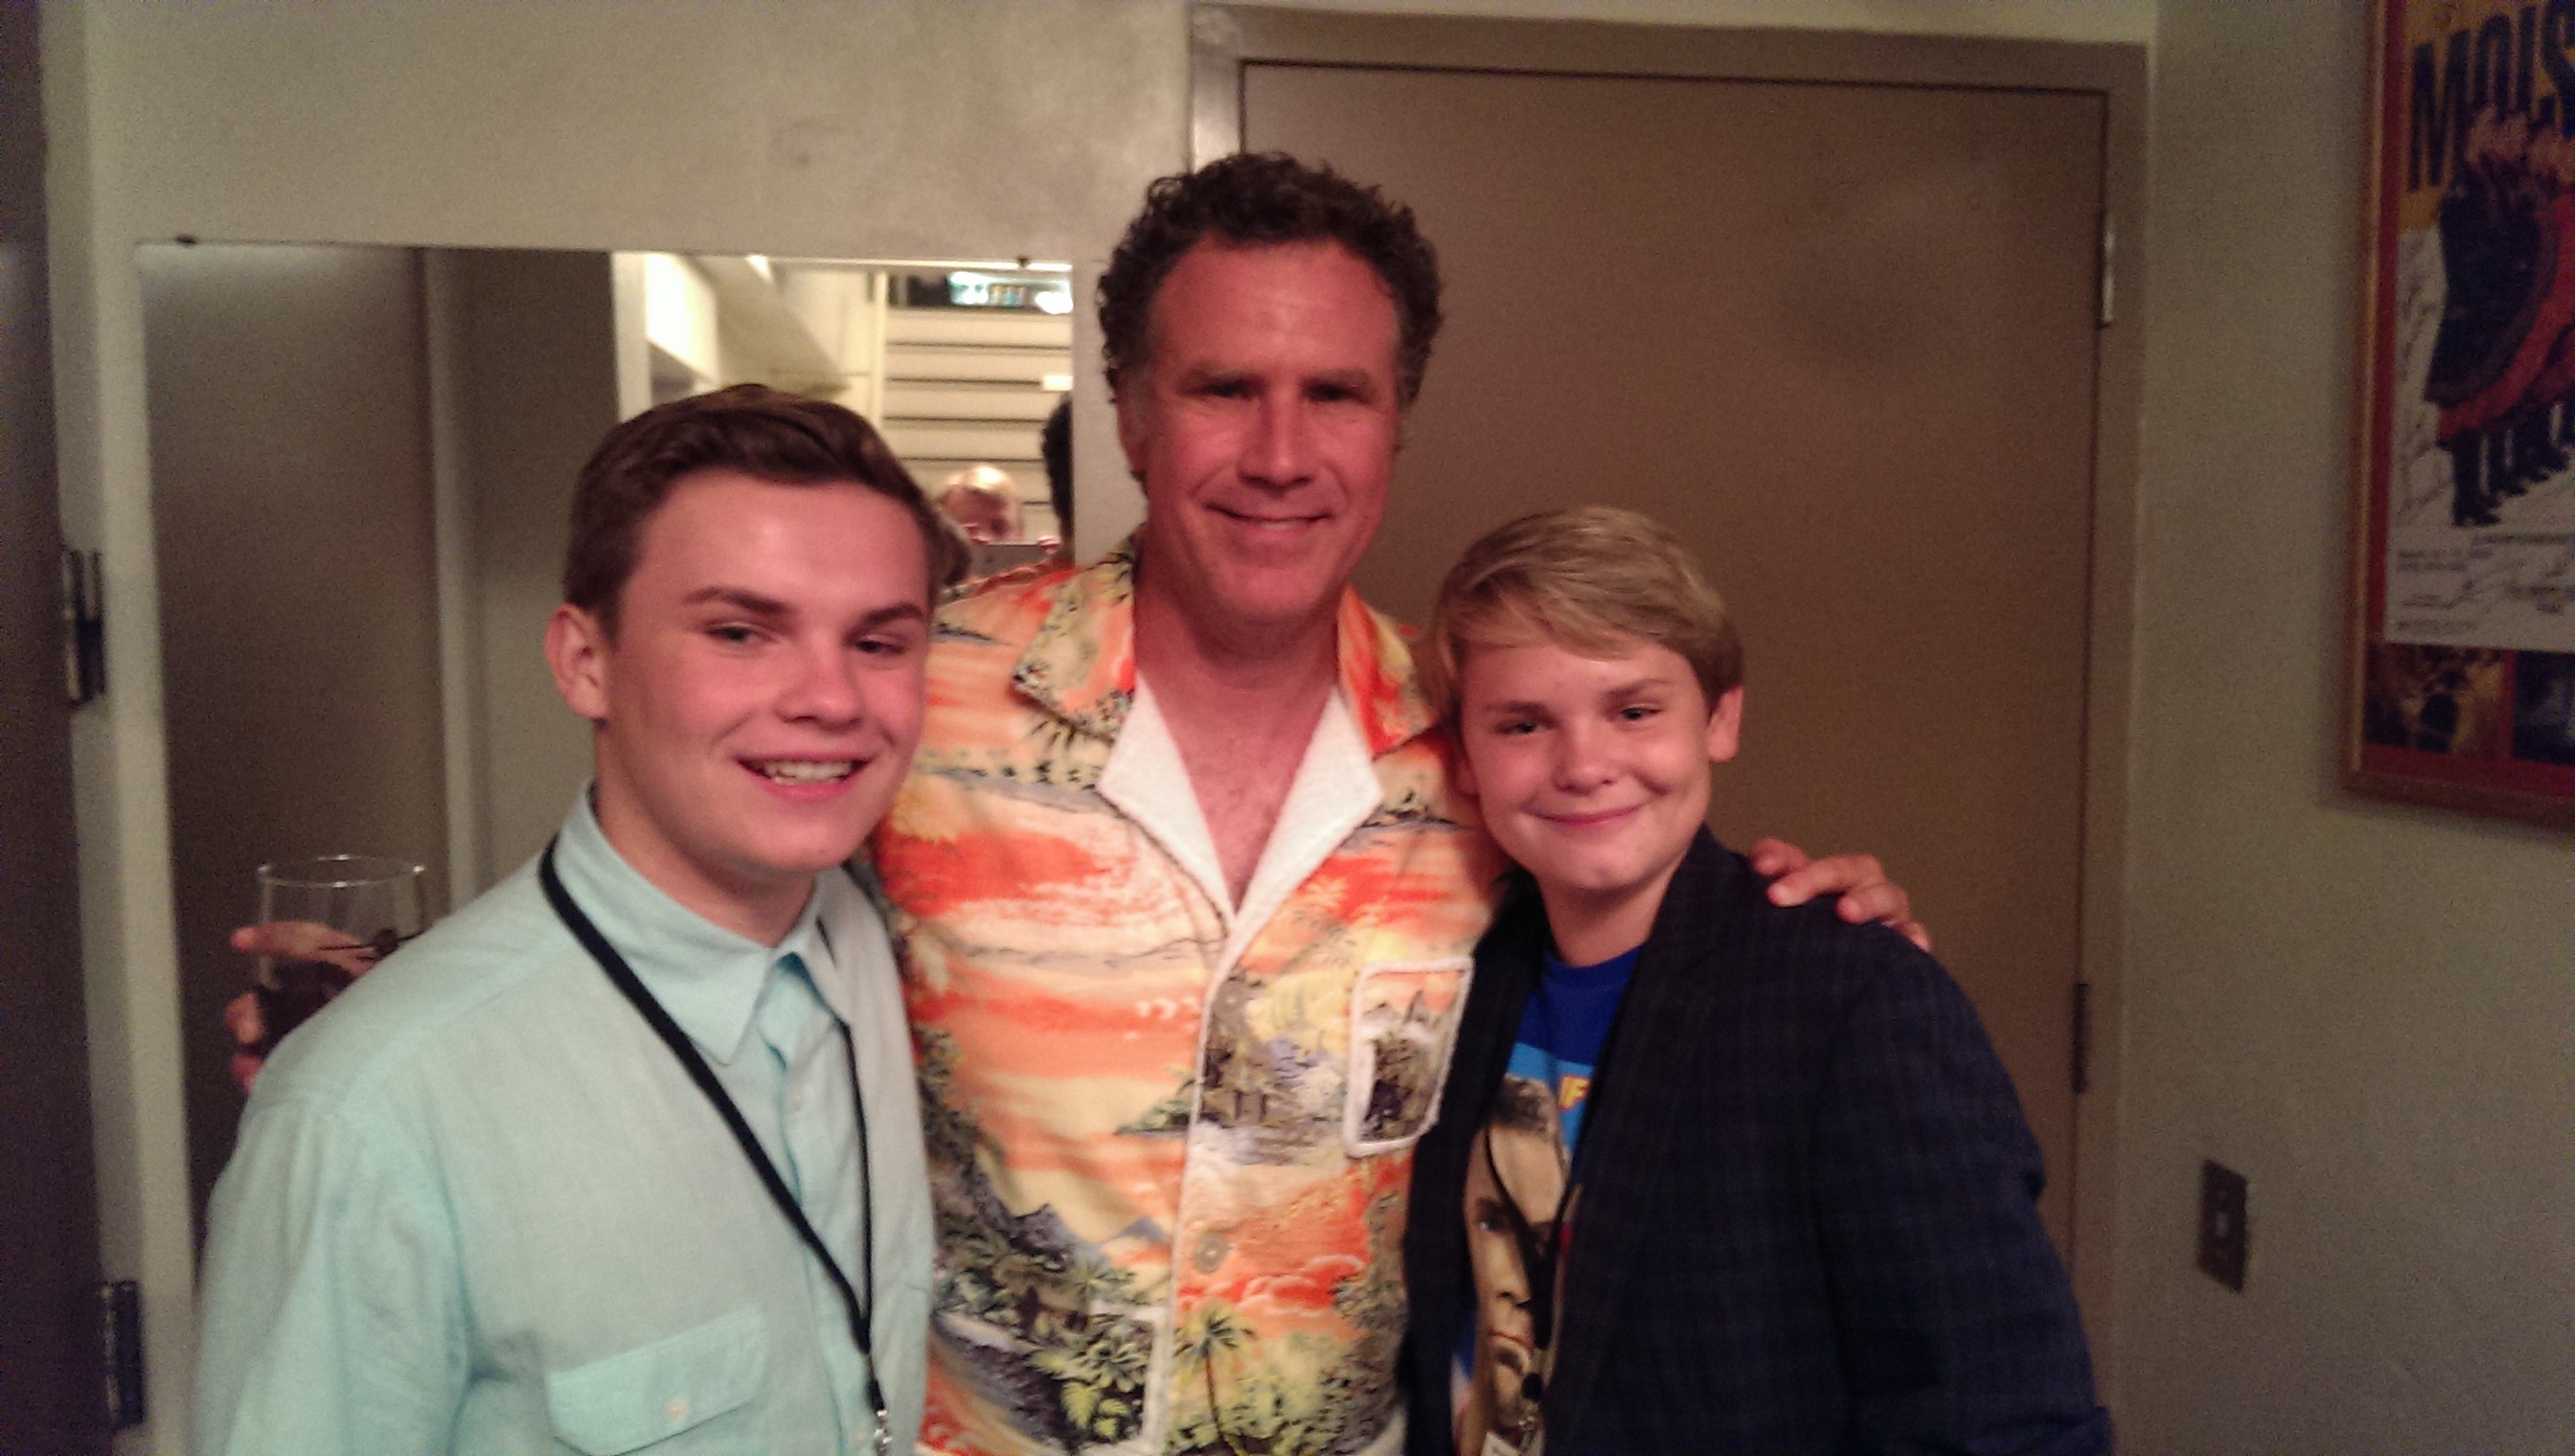 Ryan and Reese Hartwig with Will Ferrell at the Cancer for College Comedy Explosion in San Diego. #cfc